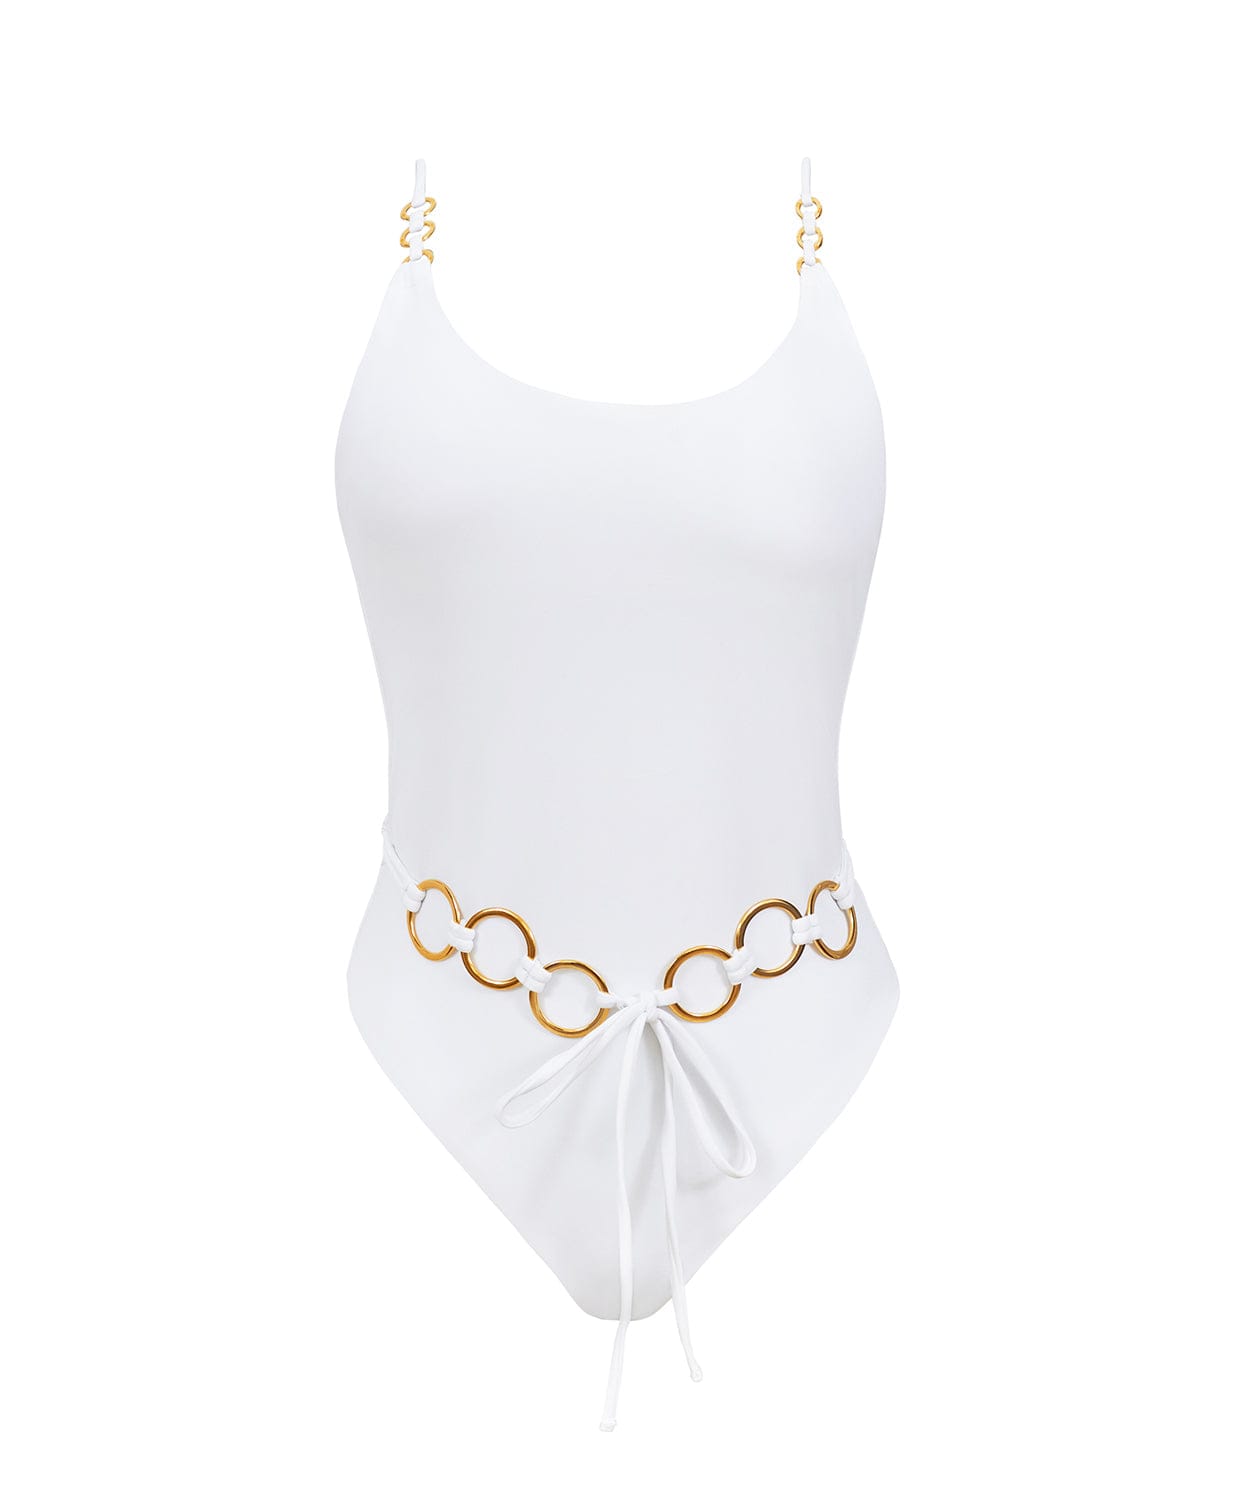 Gold Chain One Piece swimsuit in white - Same